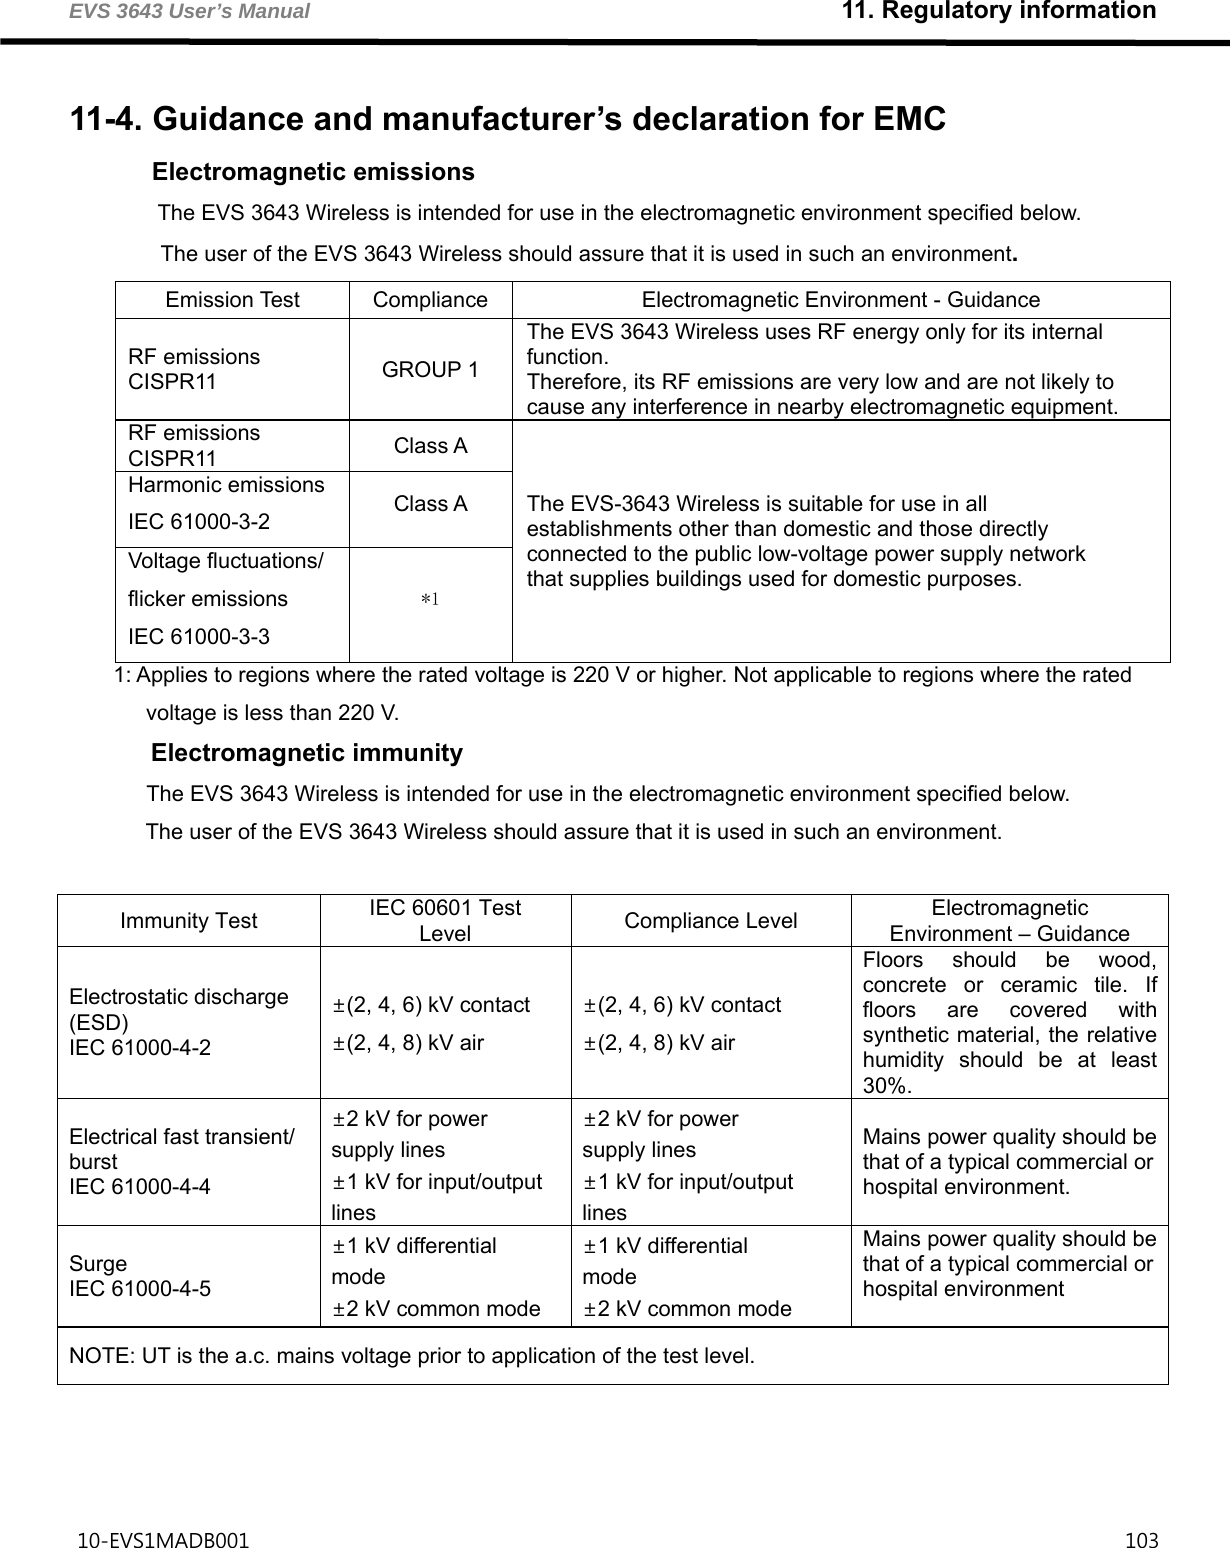 EVS 3643 User’s Manual                                                   11. Regulatory information 10-EVS1MADB001                                                                                    103   11-4. Guidance and manufacturer’s declaration for EMC Electromagnetic emissions The EVS 3643 Wireless is intended for use in the electromagnetic environment specified below. The user of the EVS 3643 Wireless should assure that it is used in such an environment. Emission Test  Compliance  Electromagnetic Environment - Guidance RF emissions CISPR11  GROUP 1 The EVS 3643 Wireless uses RF energy only for its internal function. Therefore, its RF emissions are very low and are not likely to cause any interference in nearby electromagnetic equipment. RF emissions CISPR11  Class A The EVS-3643 Wireless is suitable for use in all establishments other than domestic and those directly connected to the public low-voltage power supply network that supplies buildings used for domestic purposes. Harmonic emissions IEC 61000-3-2  Class A Voltage fluctuations/ flicker emissions IEC 61000-3-3 *1 1: Applies to regions where the rated voltage is 220 V or higher. Not applicable to regions where the rated voltage is less than 220 V. Electromagnetic immunity The EVS 3643 Wireless is intended for use in the electromagnetic environment specified below. The user of the EVS 3643 Wireless should assure that it is used in such an environment.  Immunity Test  IEC 60601 Test Level  Compliance Level  Electromagnetic Environment – Guidance Electrostatic discharge (ESD) IEC 61000-4-2 ±(2, 4, 6) kV contact ±(2, 4, 8) kV air ±(2, 4, 6) kV contact ±(2, 4, 8) kV air Floors should be wood, concrete or ceramic tile. If floors are covered with synthetic material, the relative humidity should be at least 30%. Electrical fast transient/ burst IEC 61000-4-4 ±2 kV for power supply lines ±1 kV for input/output lines ±2 kV for power supply lines ±1 kV for input/output lines Mains power quality should bethat of a typical commercial orhospital environment. Surge IEC 61000-4-5 ±1 kV differential mode ±2 kV common mode ±1 kV differential mode ±2 kV common mode Mains power quality should bethat of a typical commercial orhospital environment NOTE: UT is the a.c. mains voltage prior to application of the test level.   